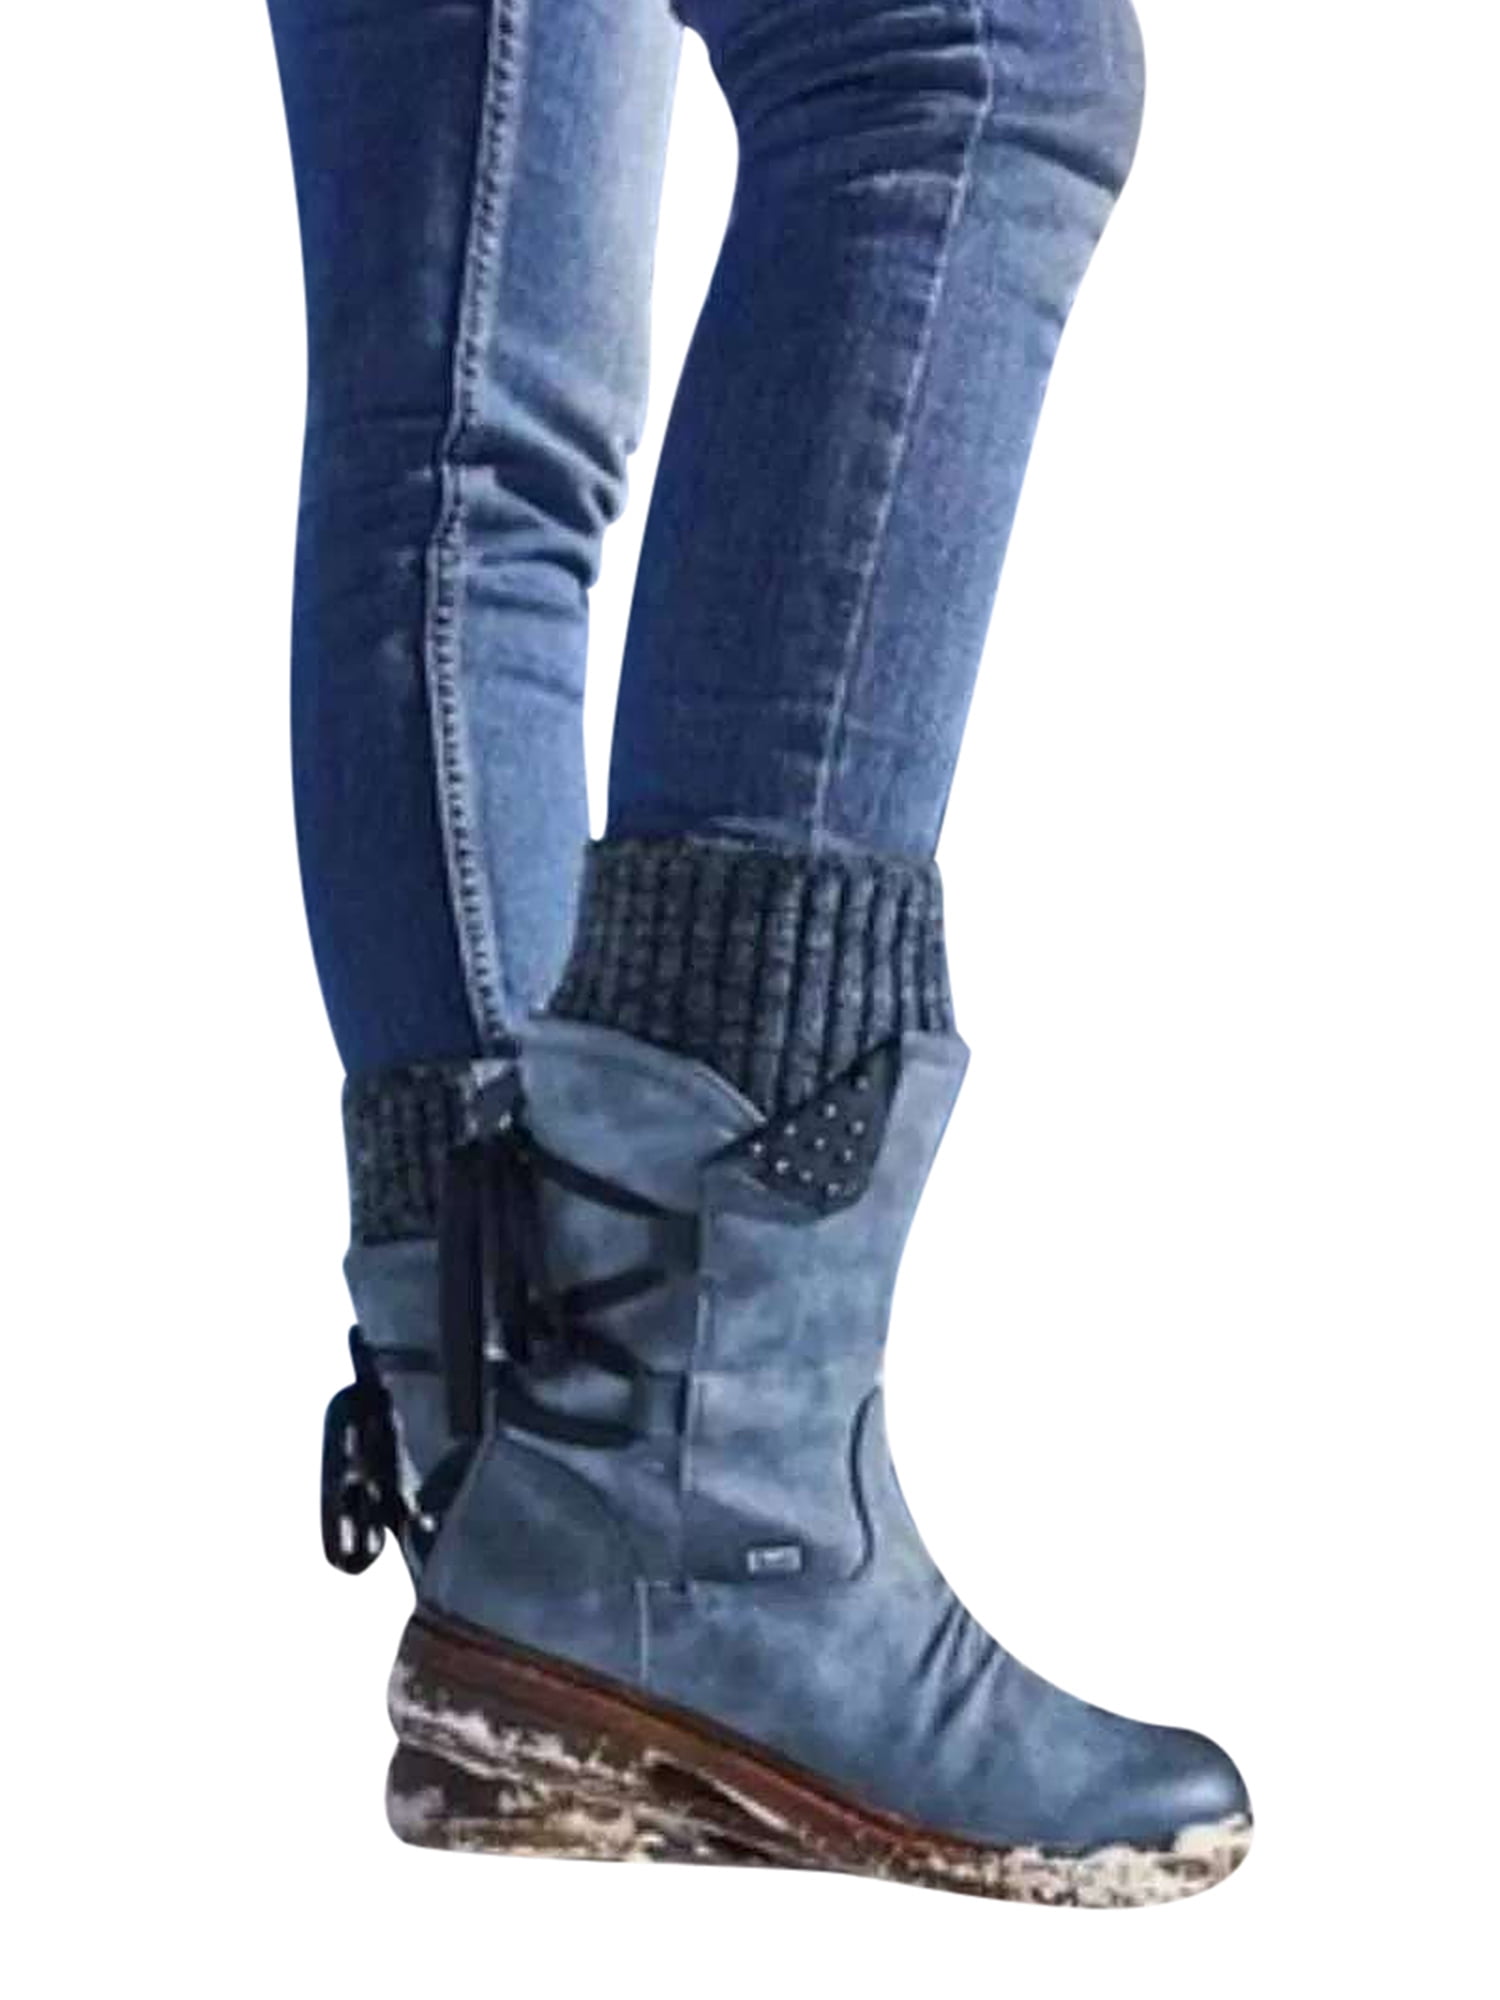 Details about   Winter Fur Lined Warm Womens Round Toe Chunky Heel Platform Snow Knee High Boots